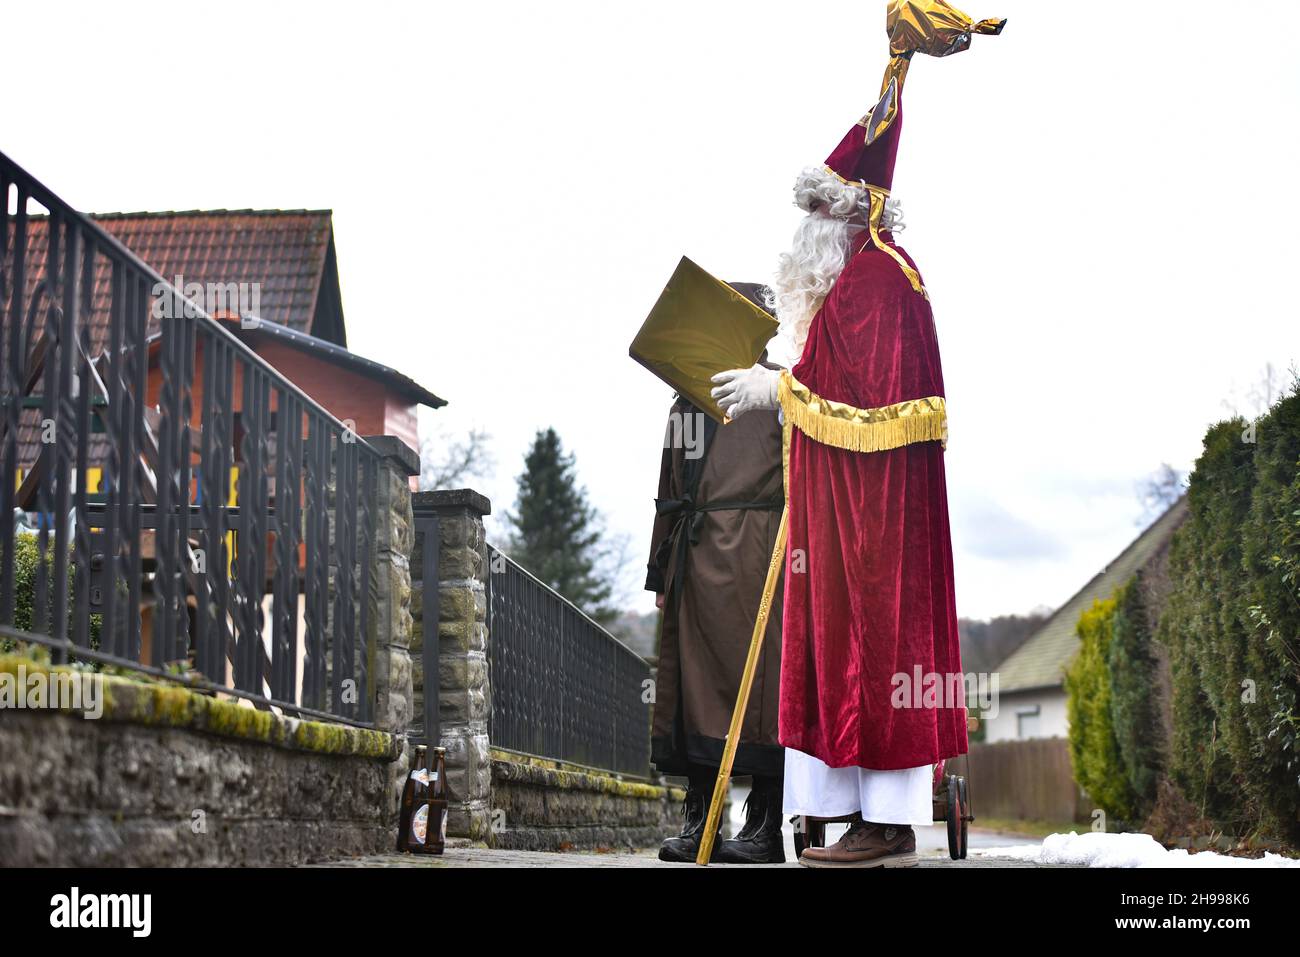 Germany ,Kirchlauter,  - 05 Dec 2021 - Local News - St. Nikolaus fundraiser for Franken Hospice Bamberg    Image: Markus Geier (Nikolaus) and Jan Schneiderbanger (Knecht Ruprecht) walk around the town of Kirchlauter, dressed as the Christmas pair, delivering goodies to children along a registered route. Those taking part donate money, 100% of the money is sent to a youth hospice in Bamberg, Germany. Stock Photo